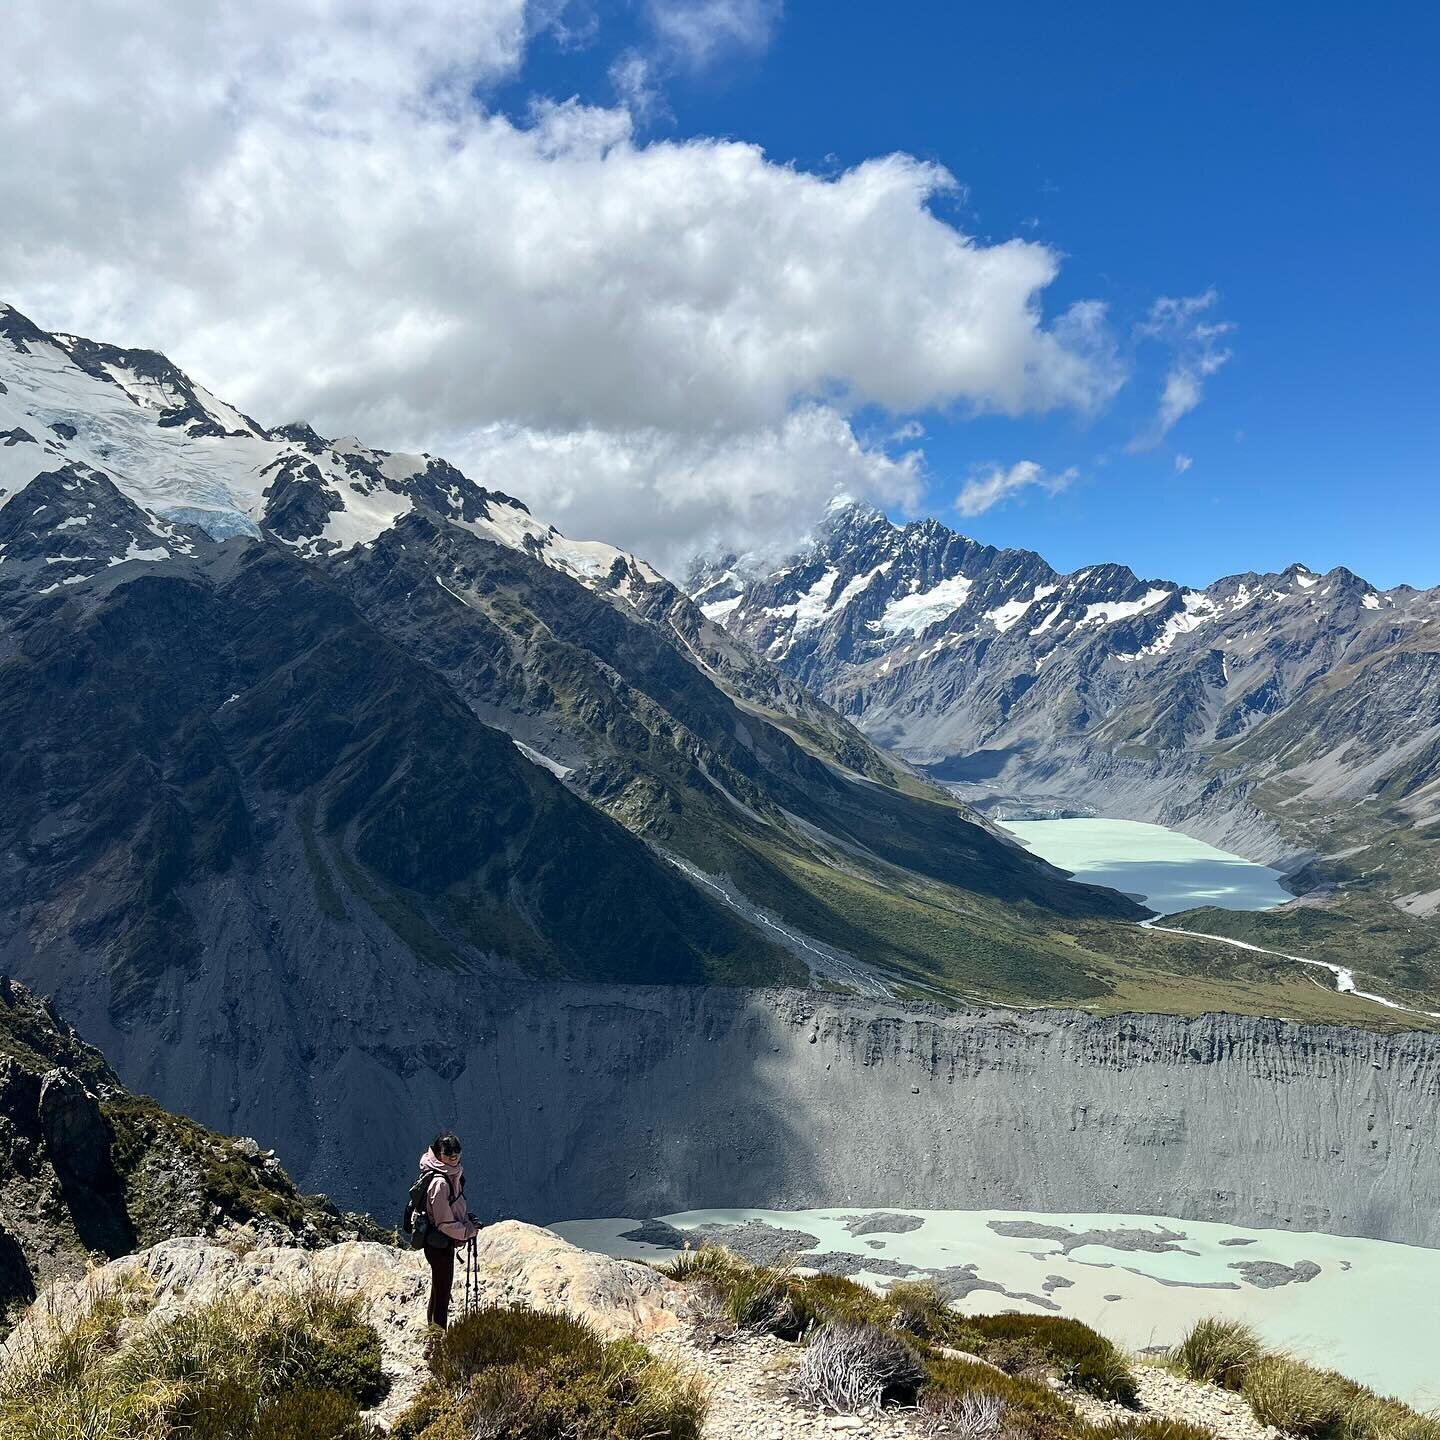 The weather foiled our plan to do an overnight in Aoraki/Mt. Cook, so we did the 2 most popular day hikes there instead. The weather was beautiful except that the wind gusts were SO strong that I had to crouch and hold on to rocks to stay balanced. 
